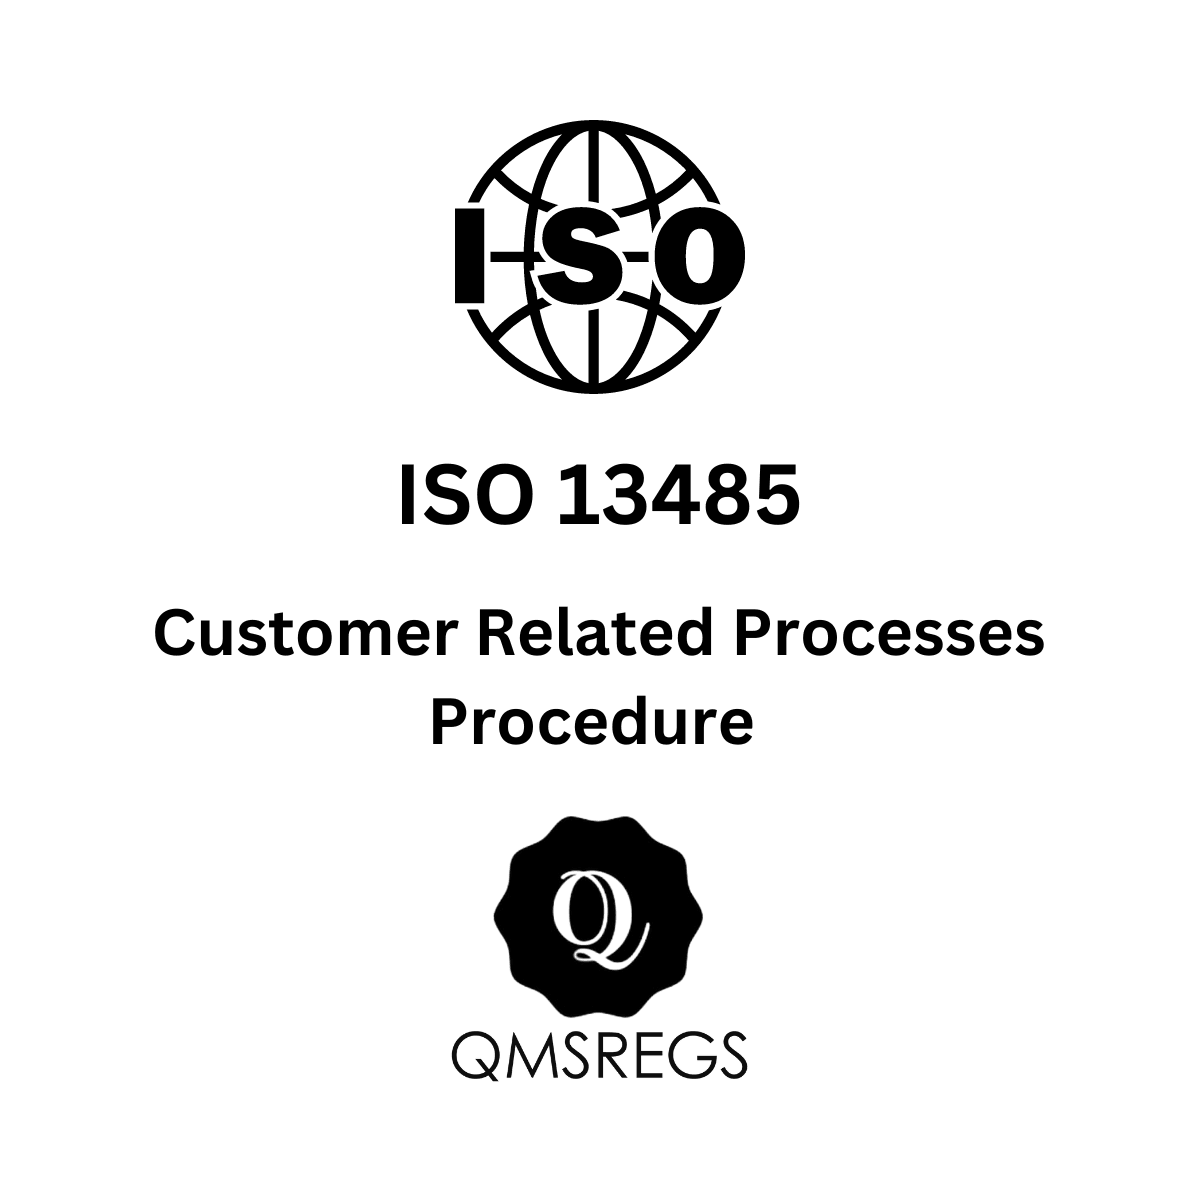 ISO 13485 Customer Related Processes Procedure Template